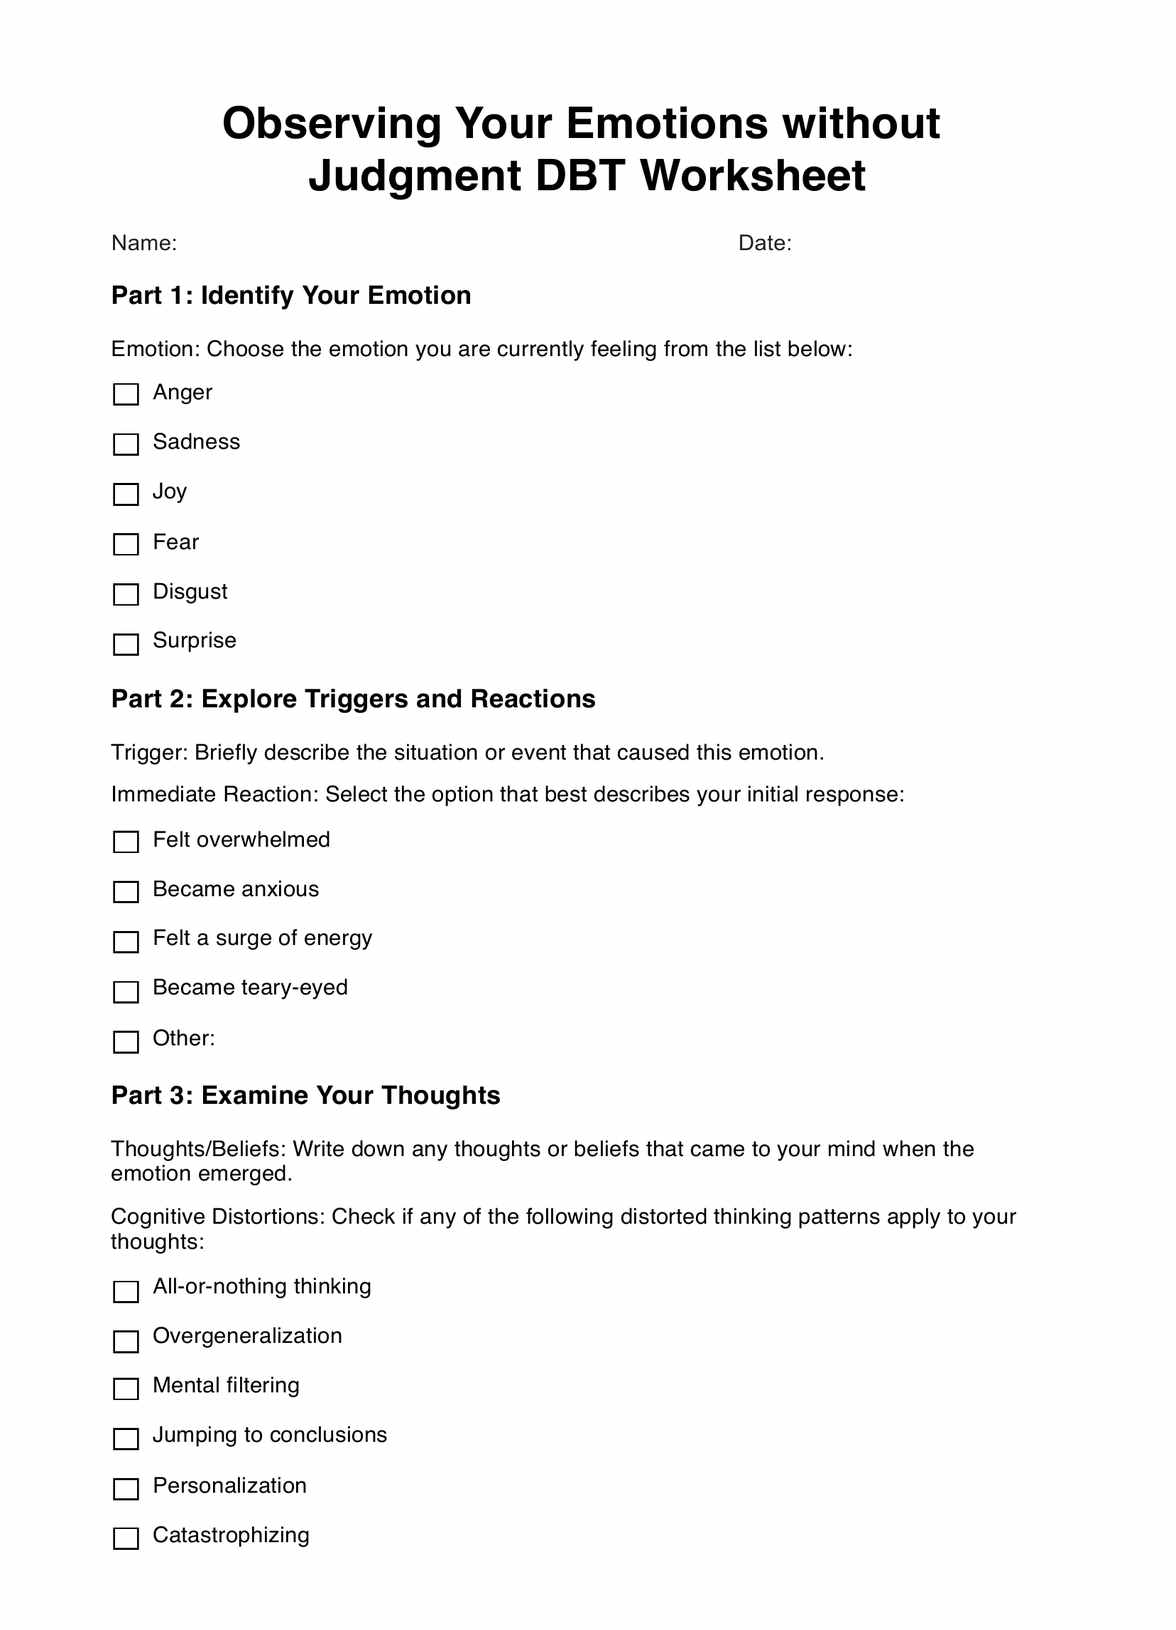 Observing Your Emotions without Judgment DBT Worksheet PDF Example